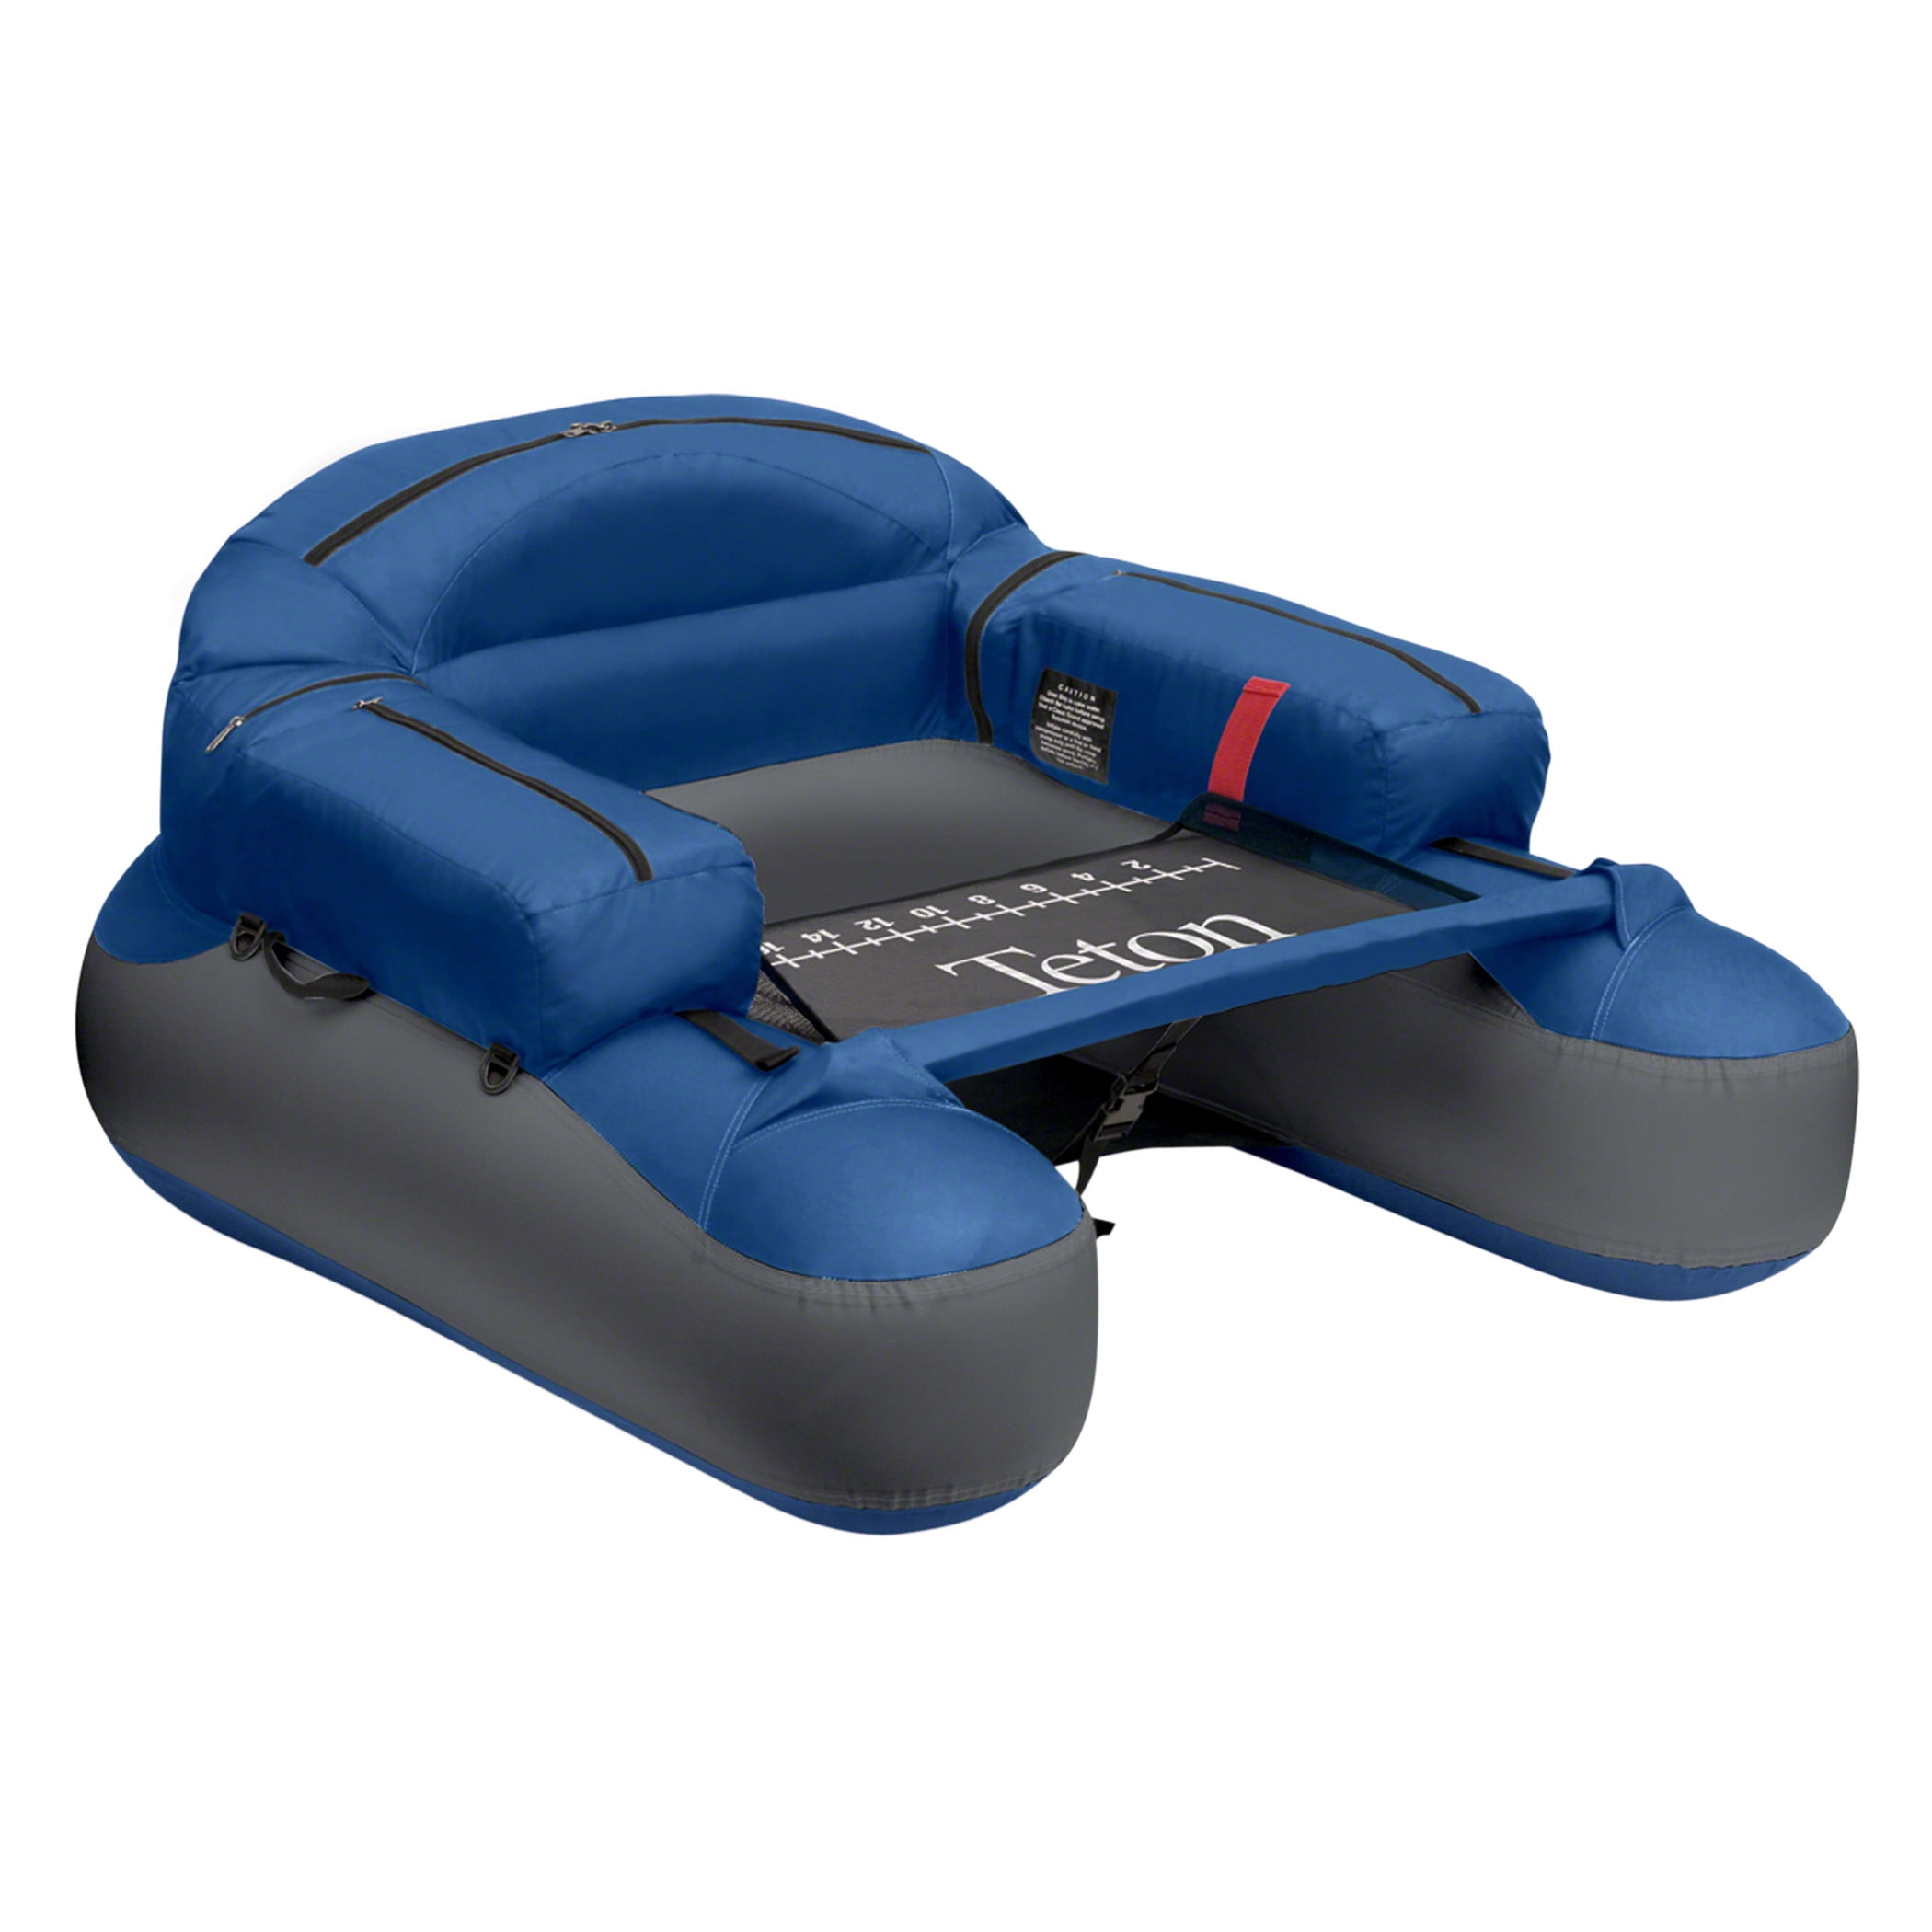 Classic Accessories Teton Float Tube, Size: One size, Blue